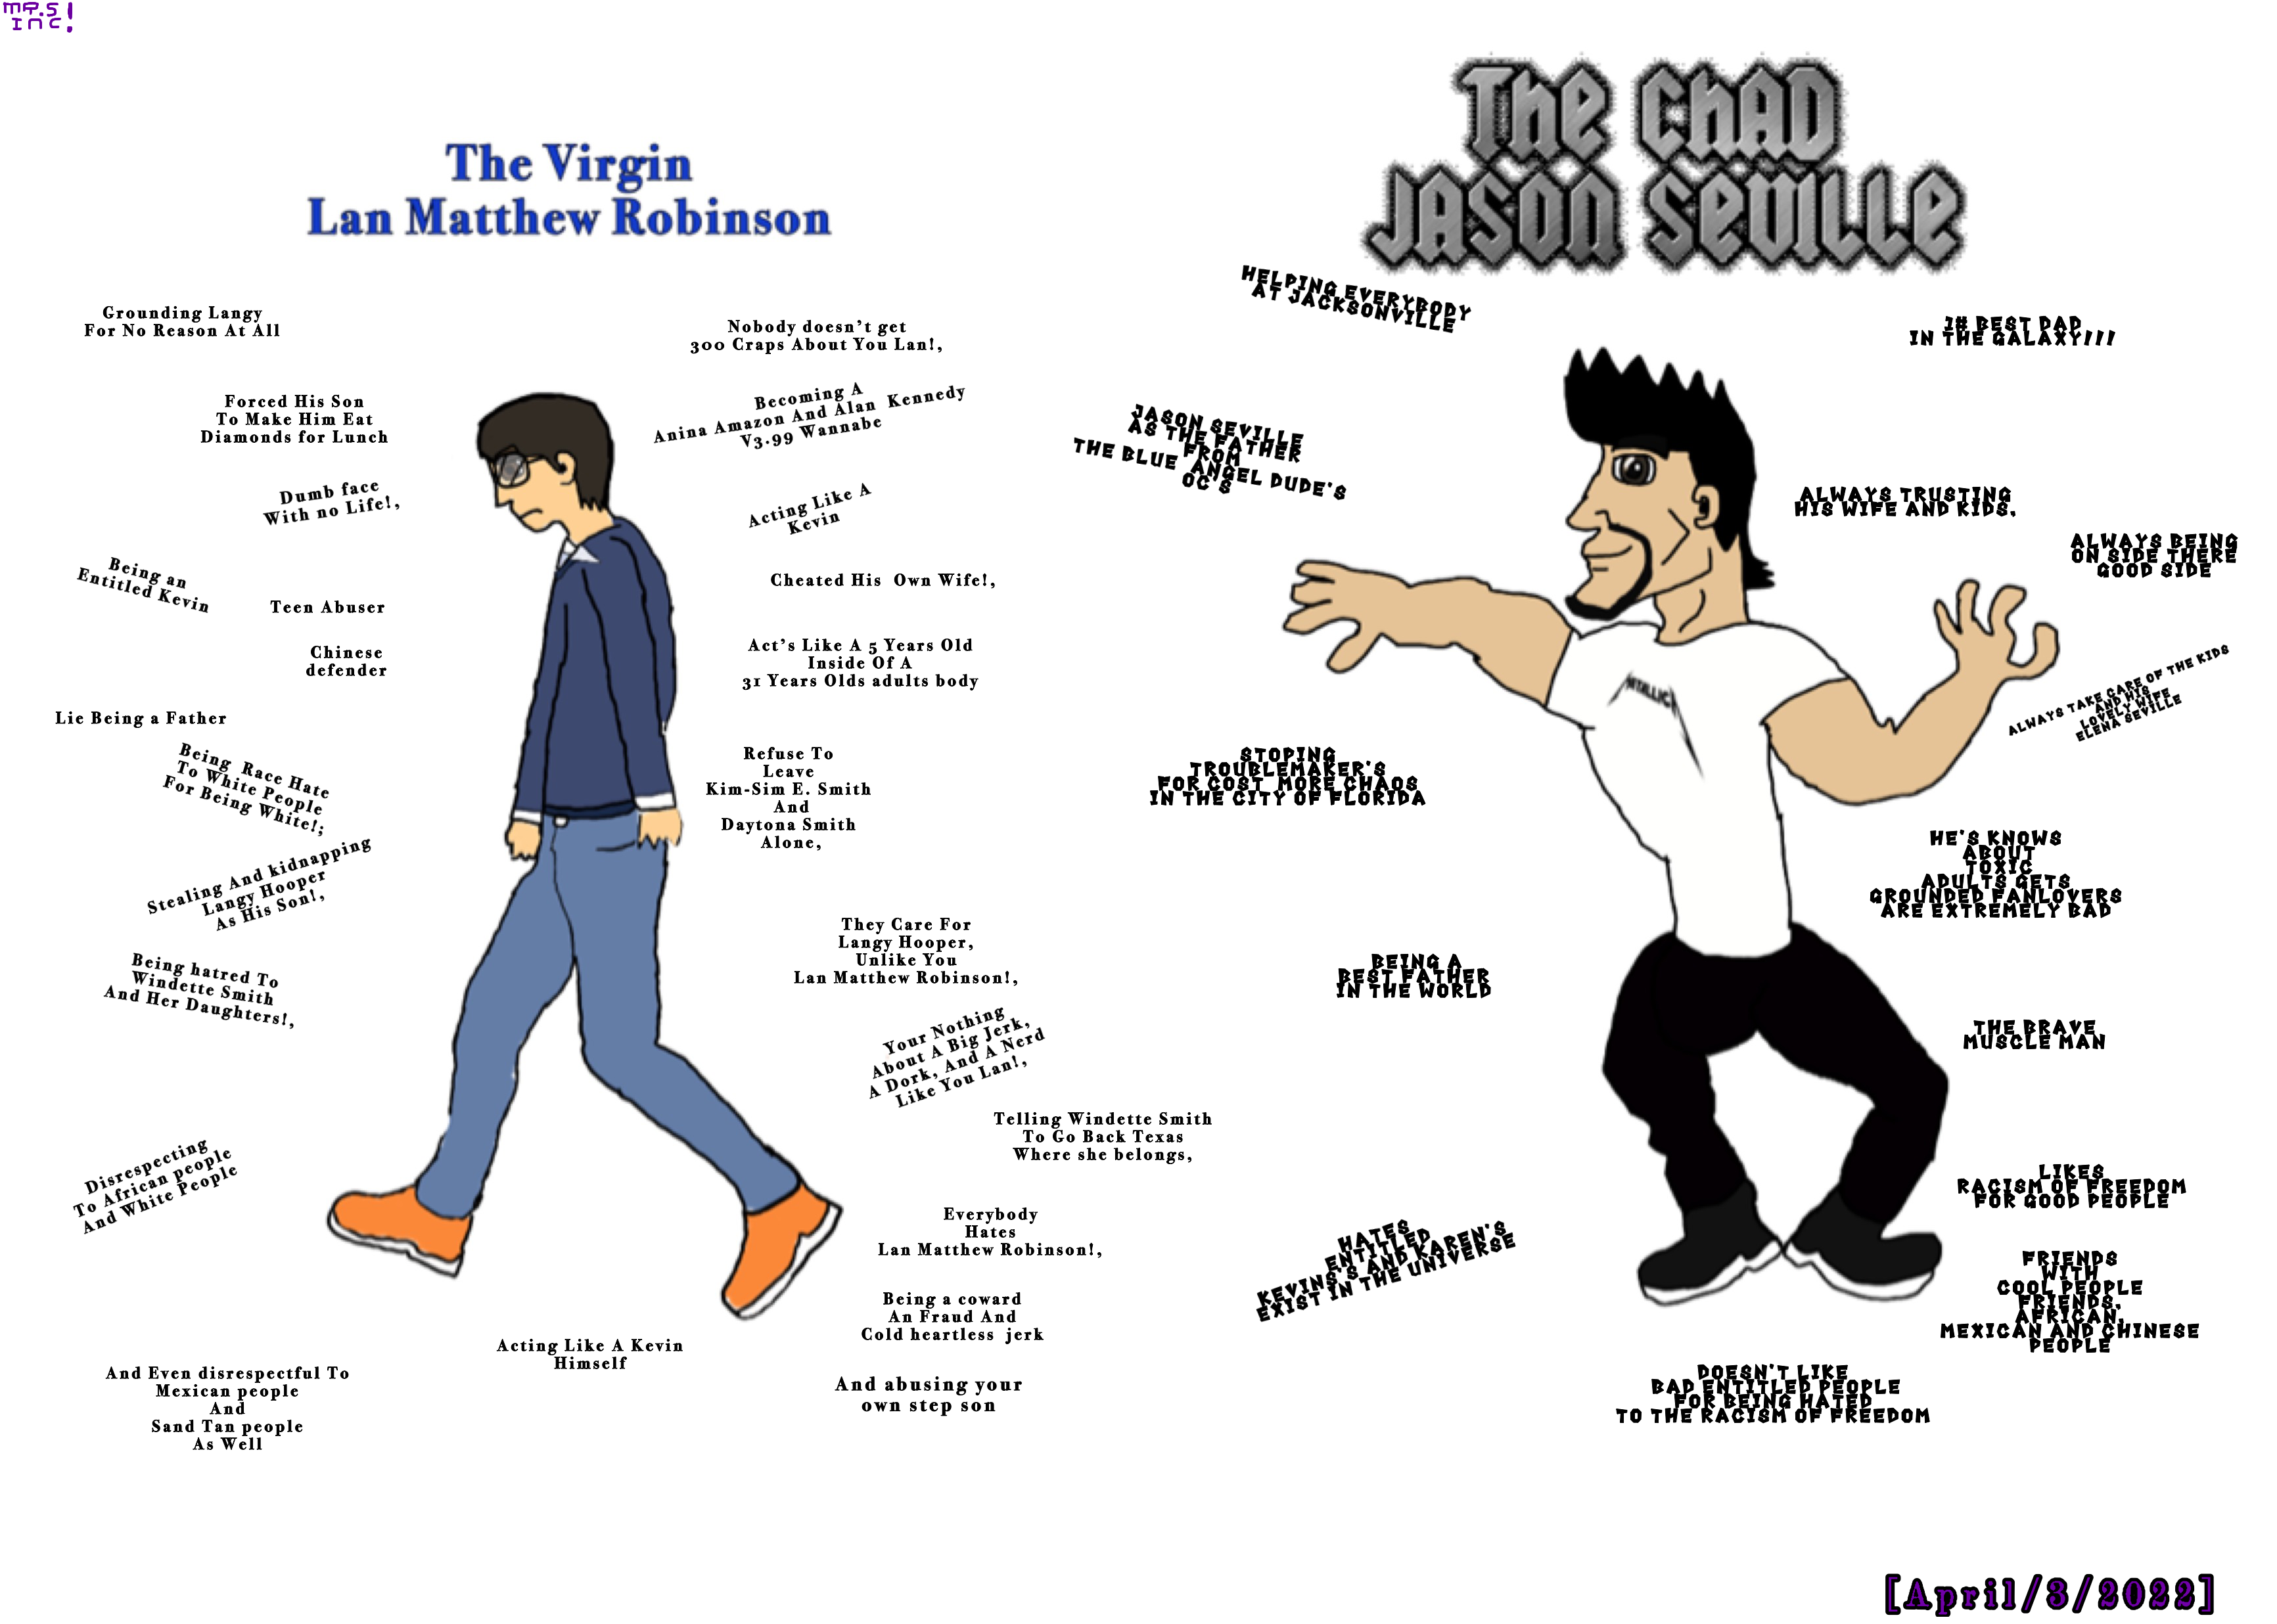 The Virgin Vs Chad Meme Is Taking Over the Entire Internet